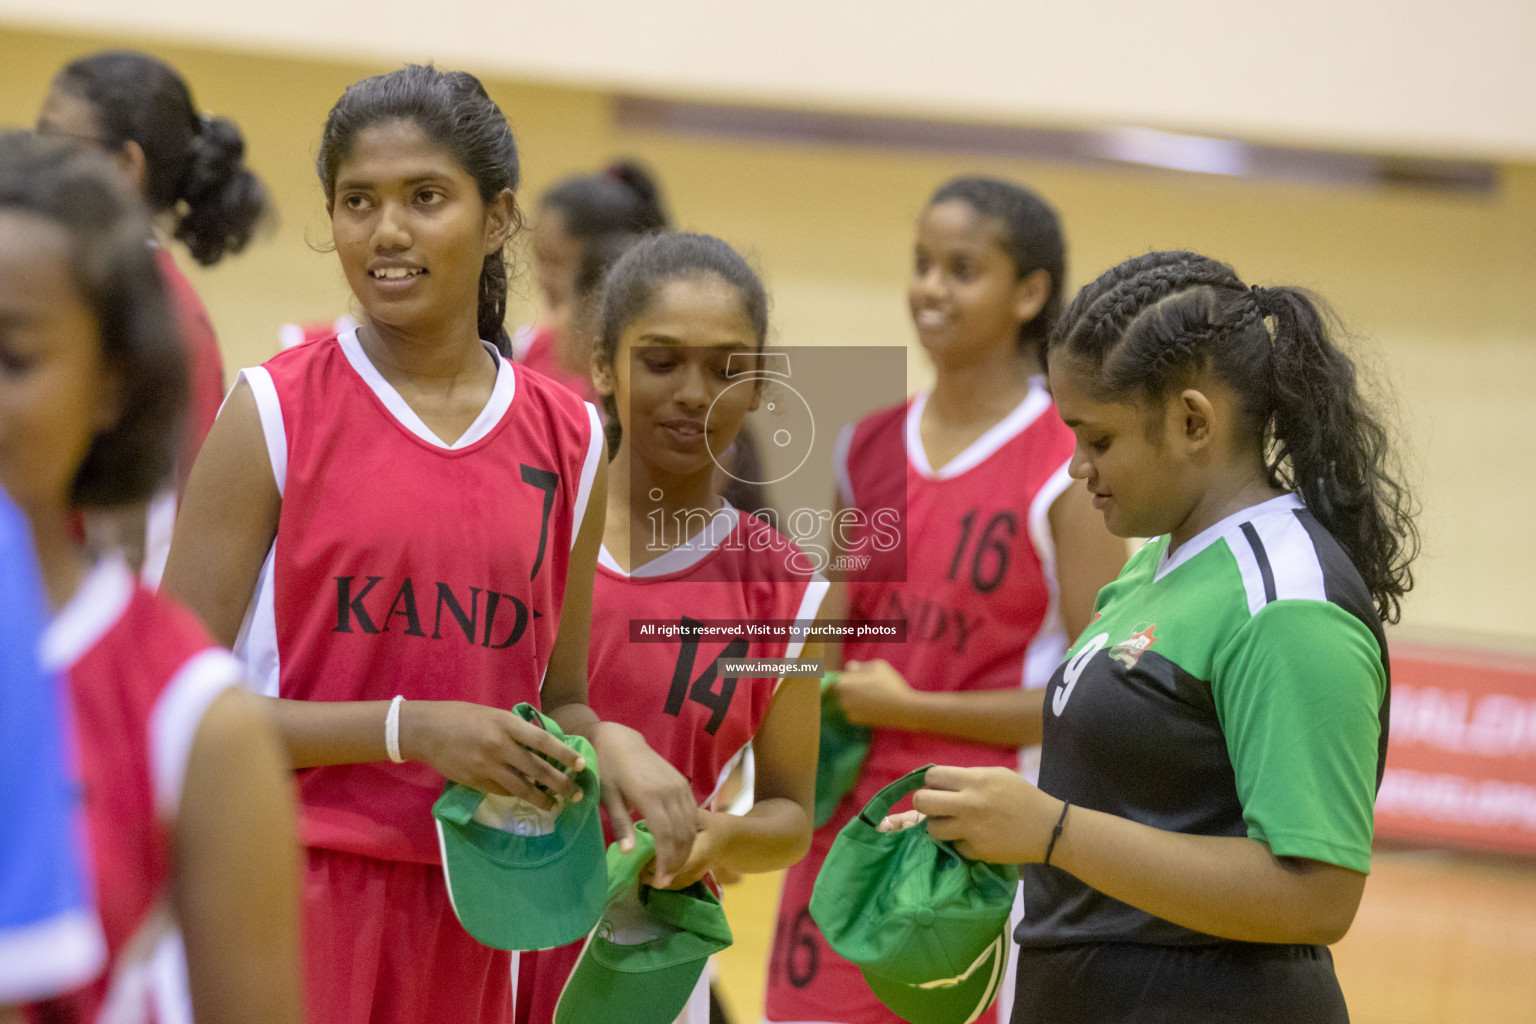 Finals of U-16 Invitational Basketball Tournament 2019 on 2nd May 2019, held in Male'. Photos: Hassan Simah/images.mv